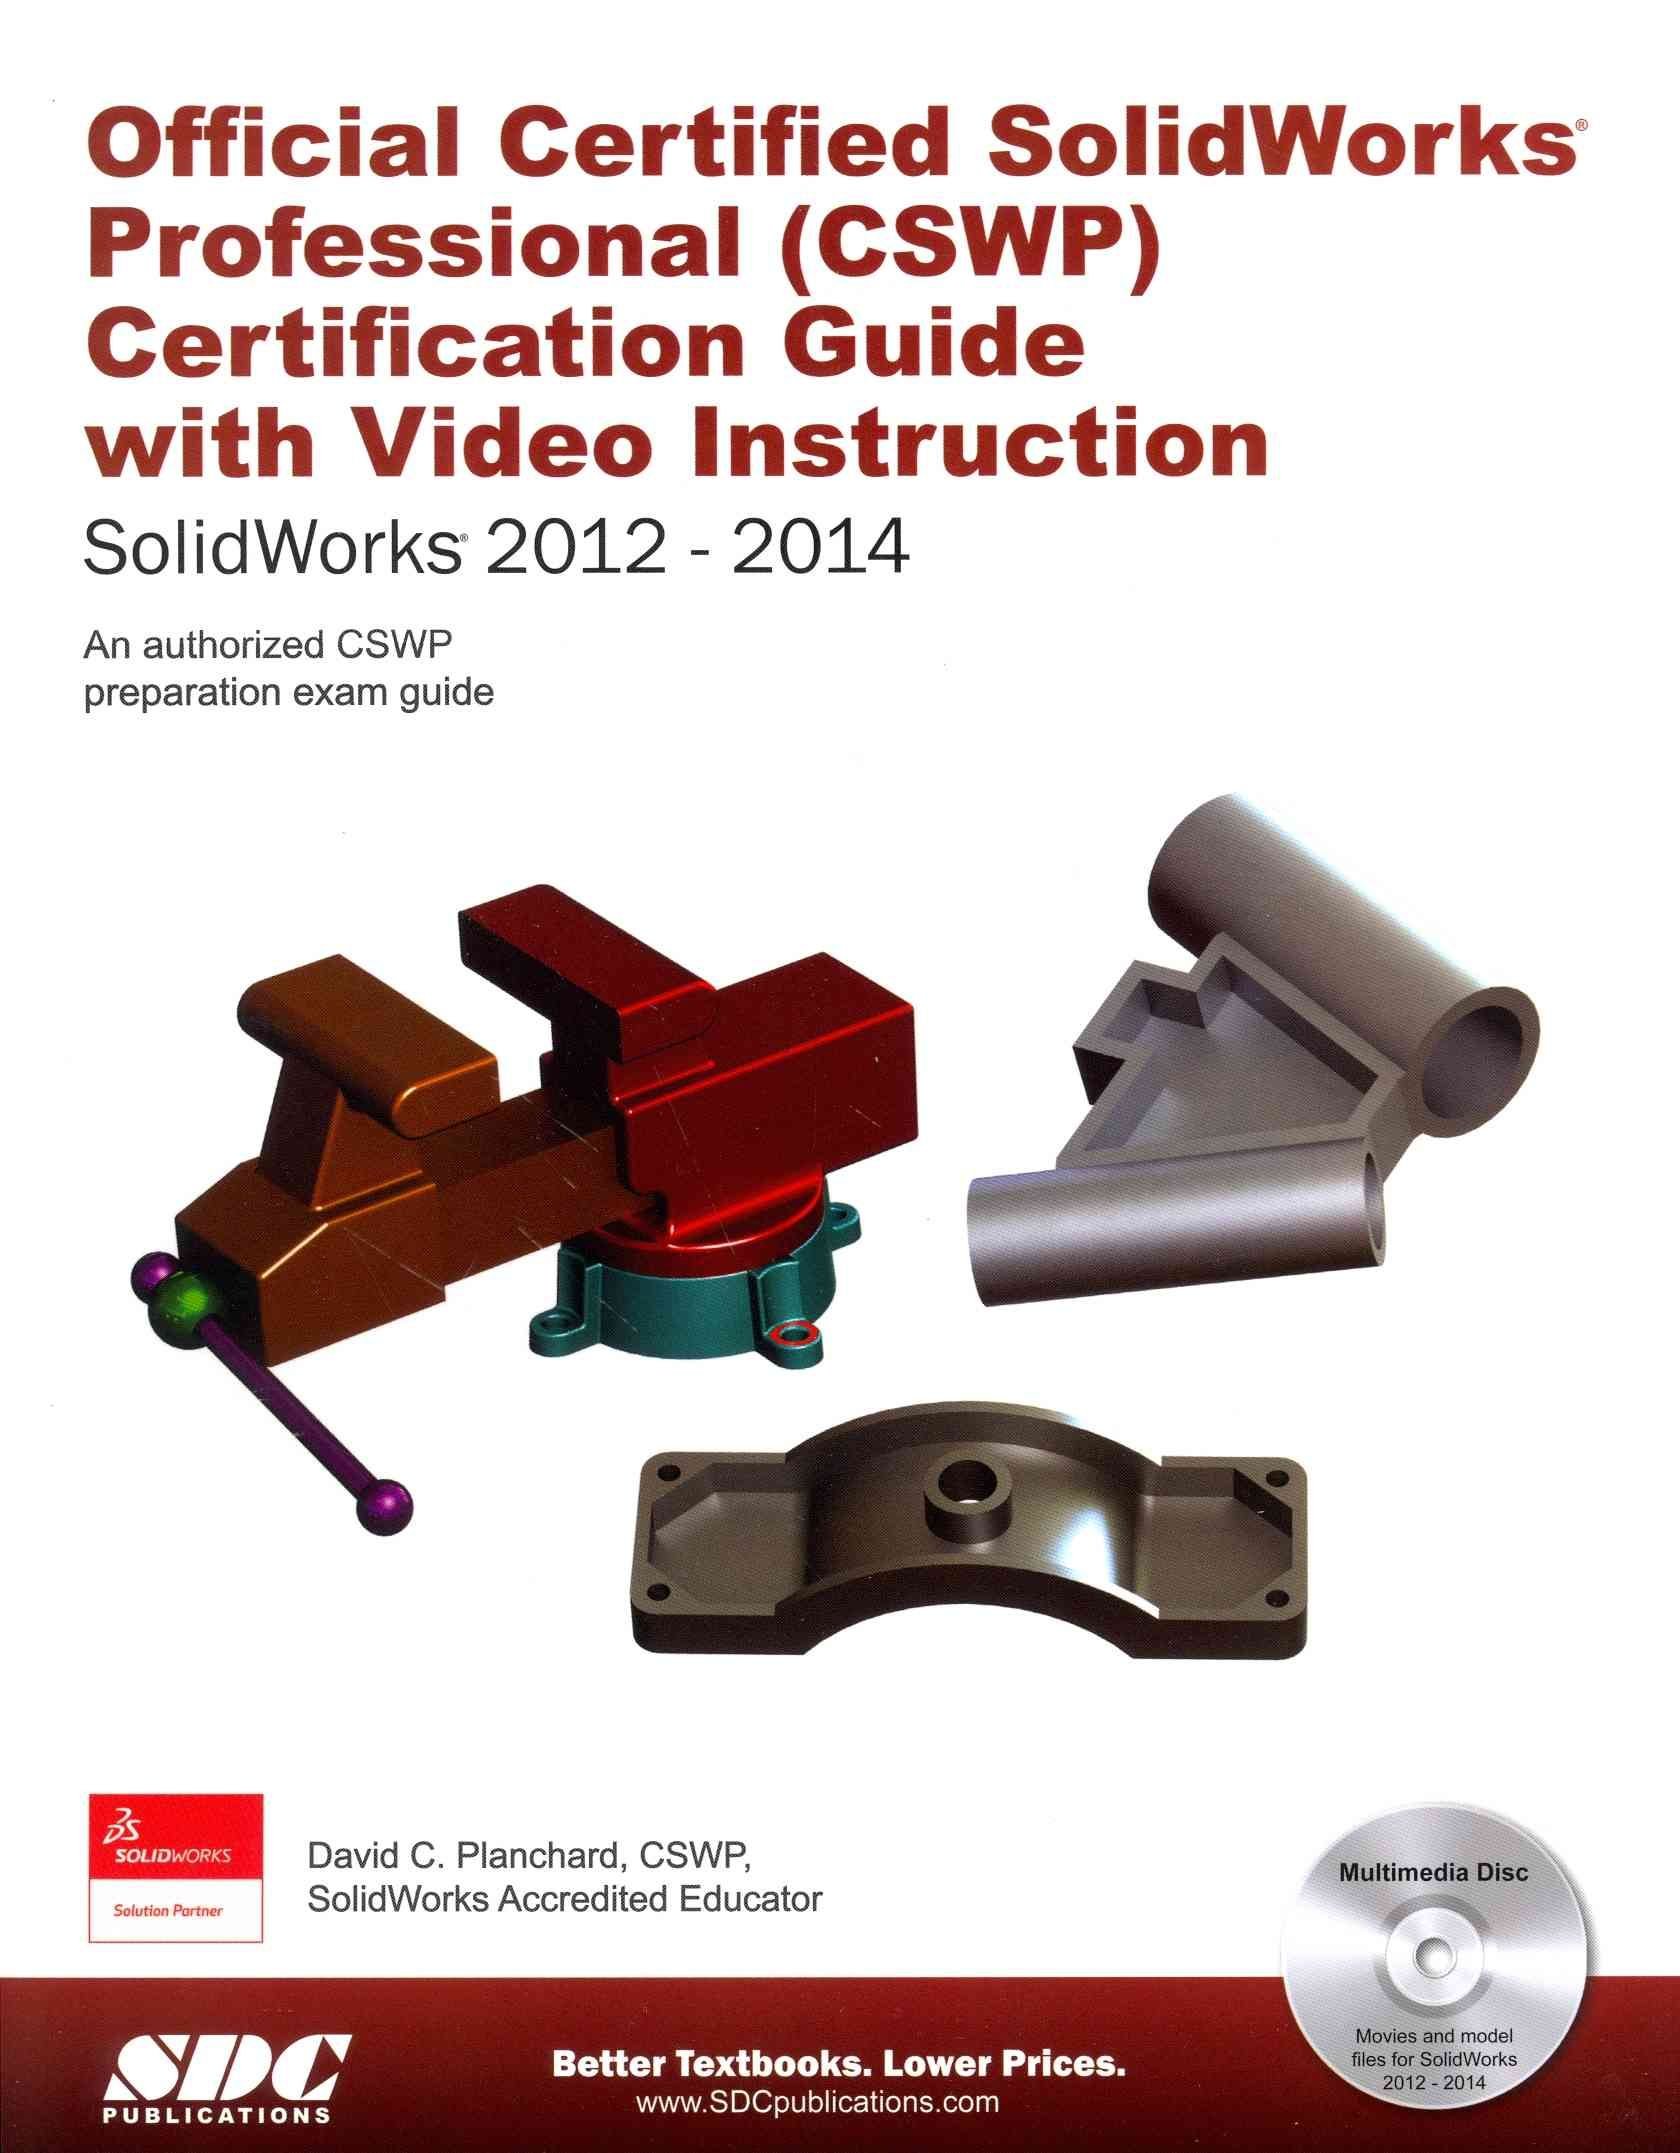 Official Certified SolidWorks Professional (CSWP) Certification Guide 2014